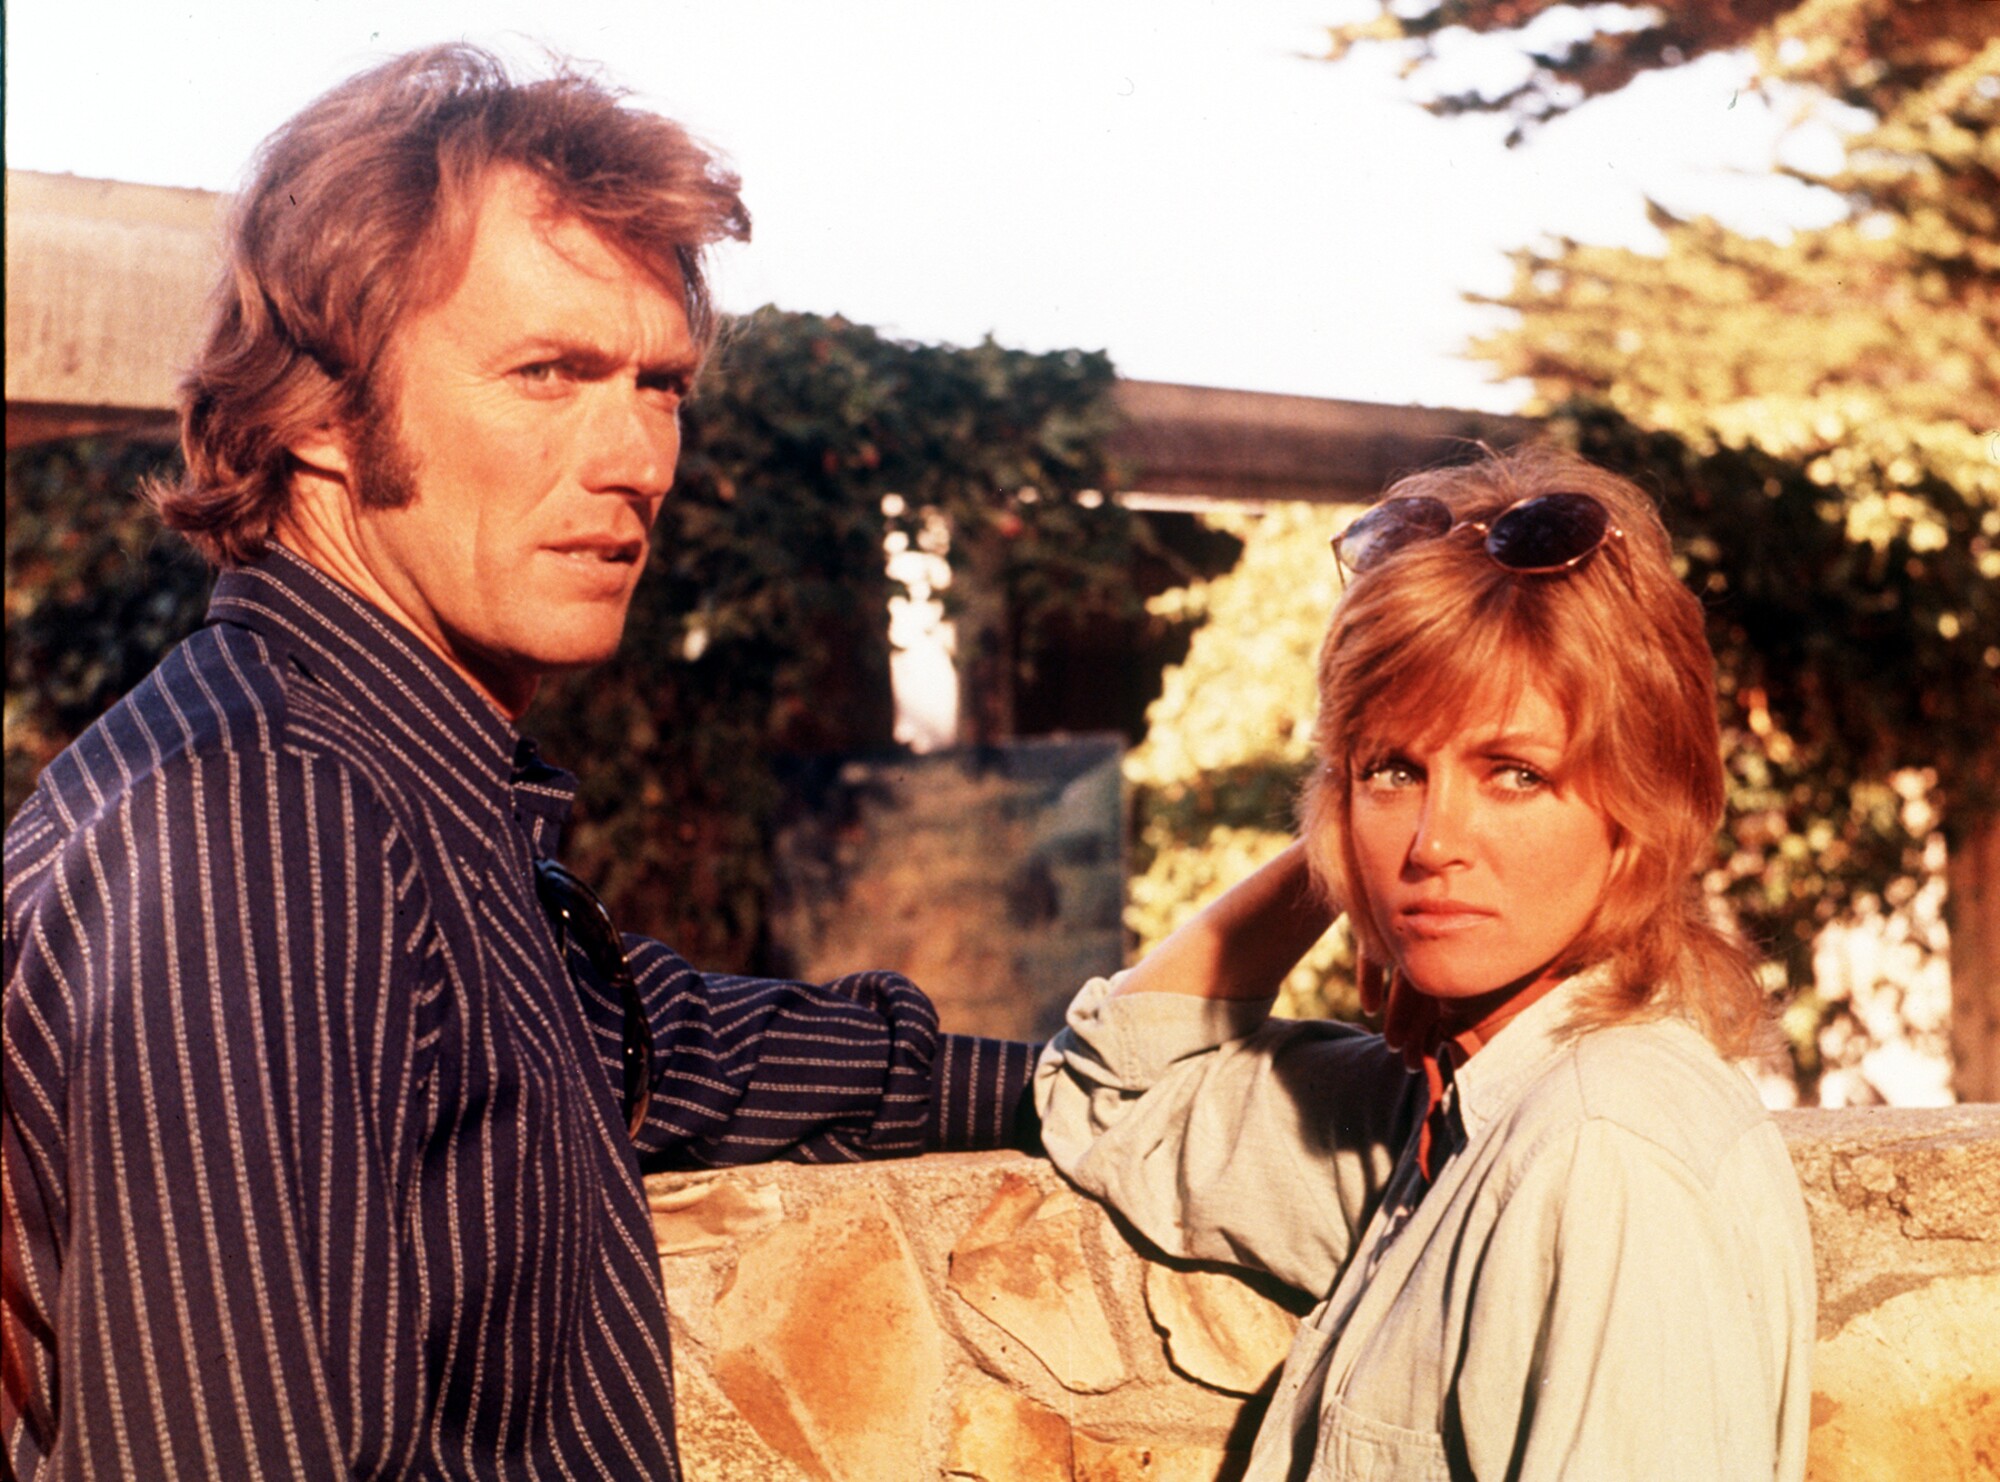 Clint Eastwood and Donna Mills in the movie PLAY MISTY FOR ME. Eastwood's directing debut.